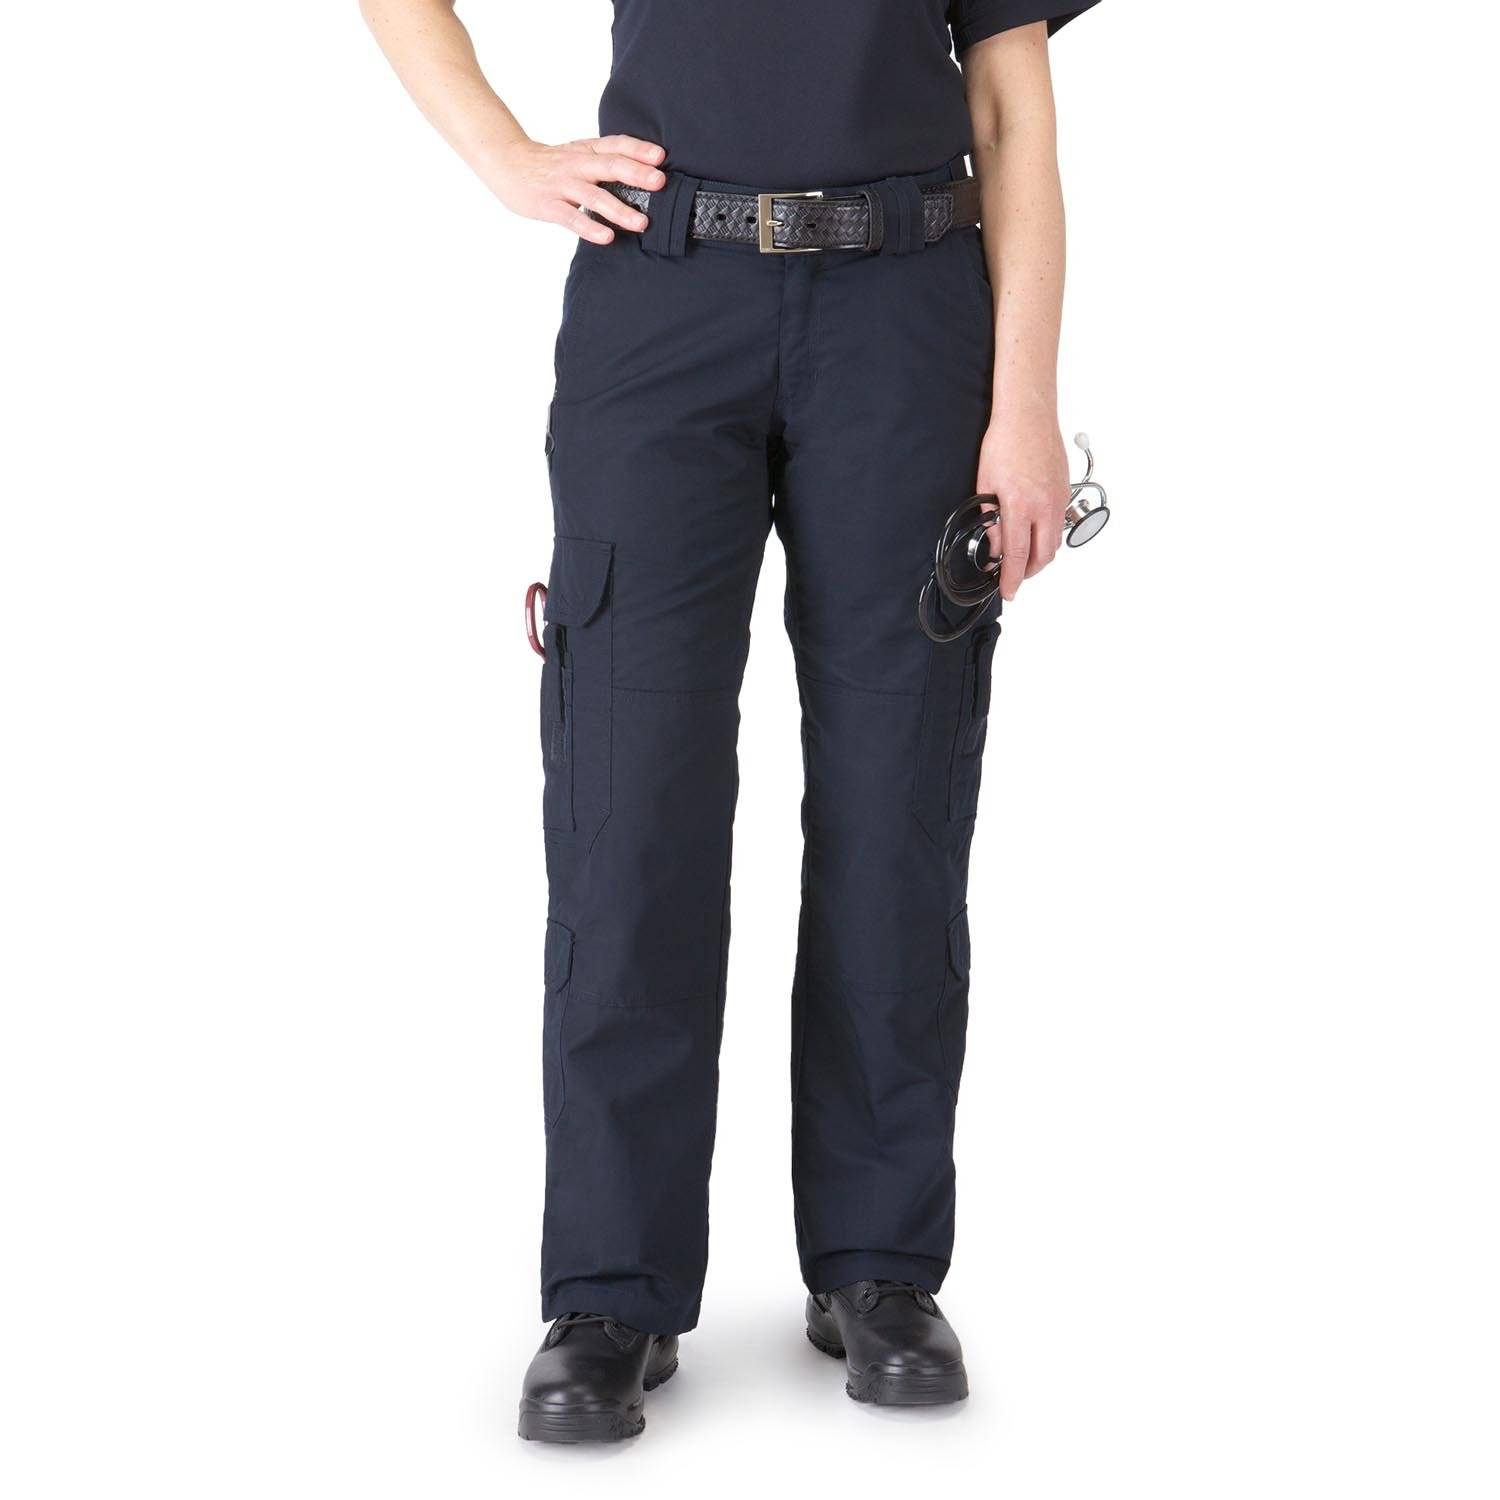 Apparel Review: 5.11 Tactical Abby Tight